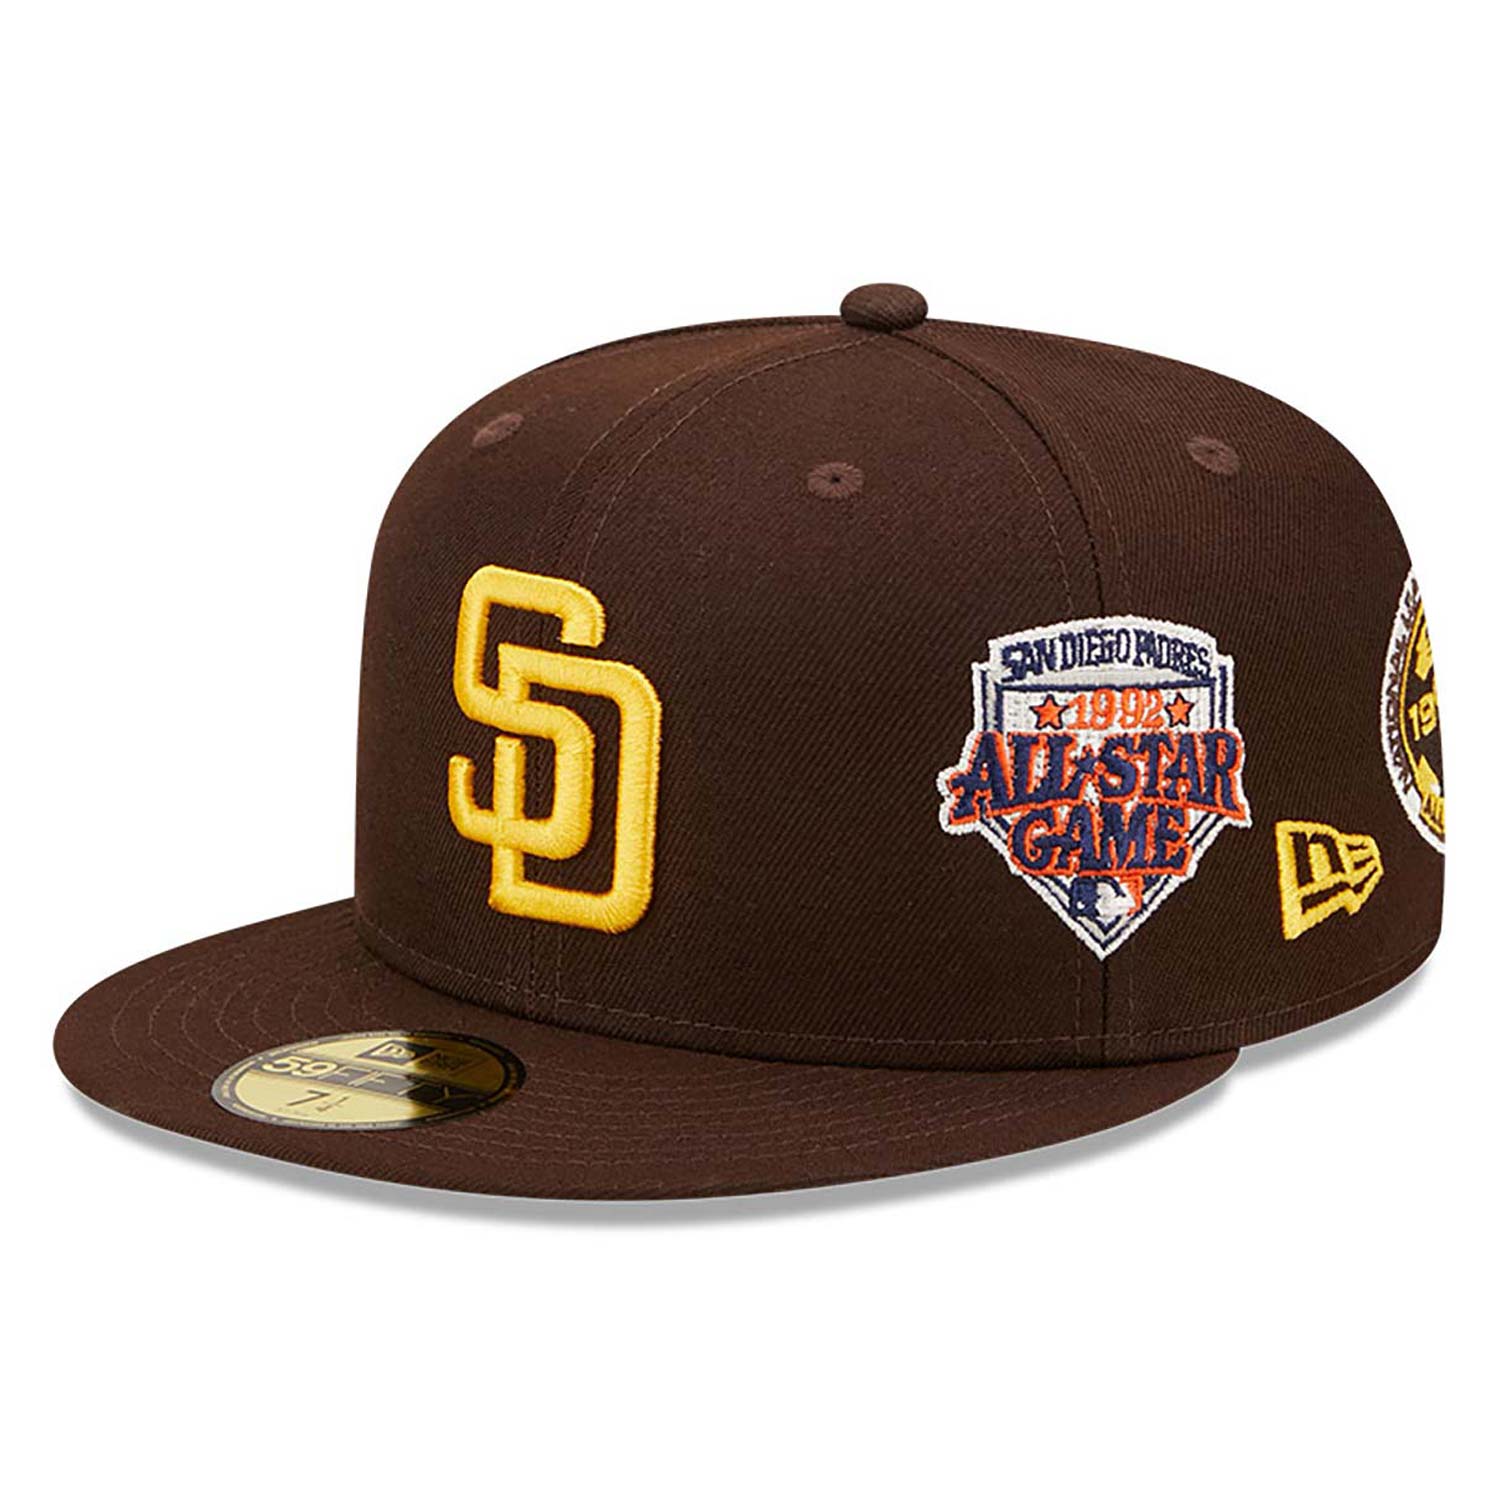 official-new-era-cooperstown-multi-patch-san-diego-padres-59fifty-fitted-cap-c2-153-new-era